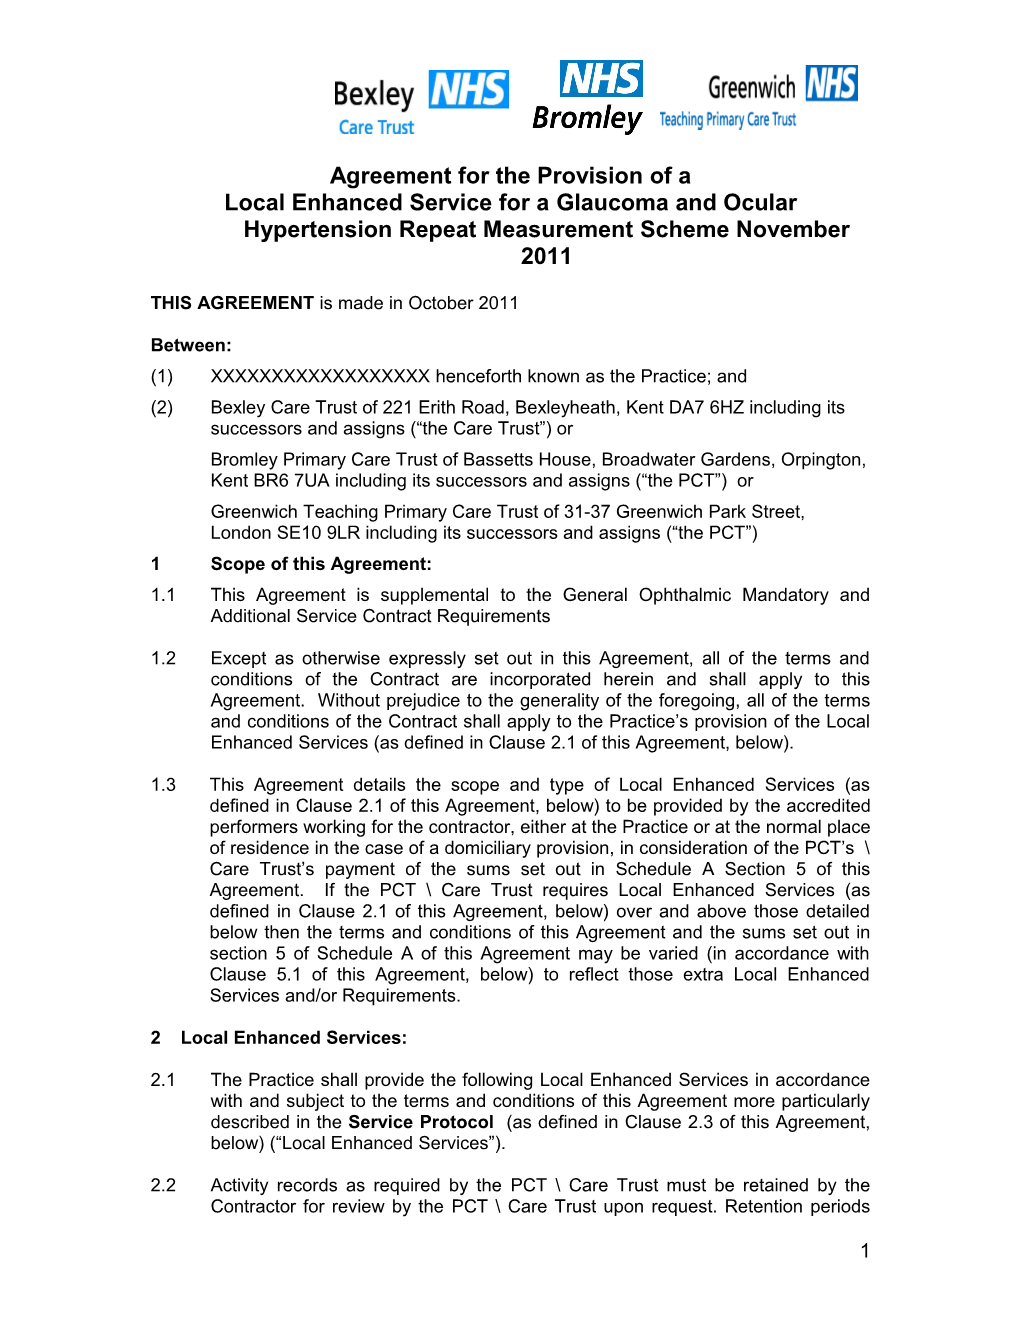 Agreement for the Provision of A